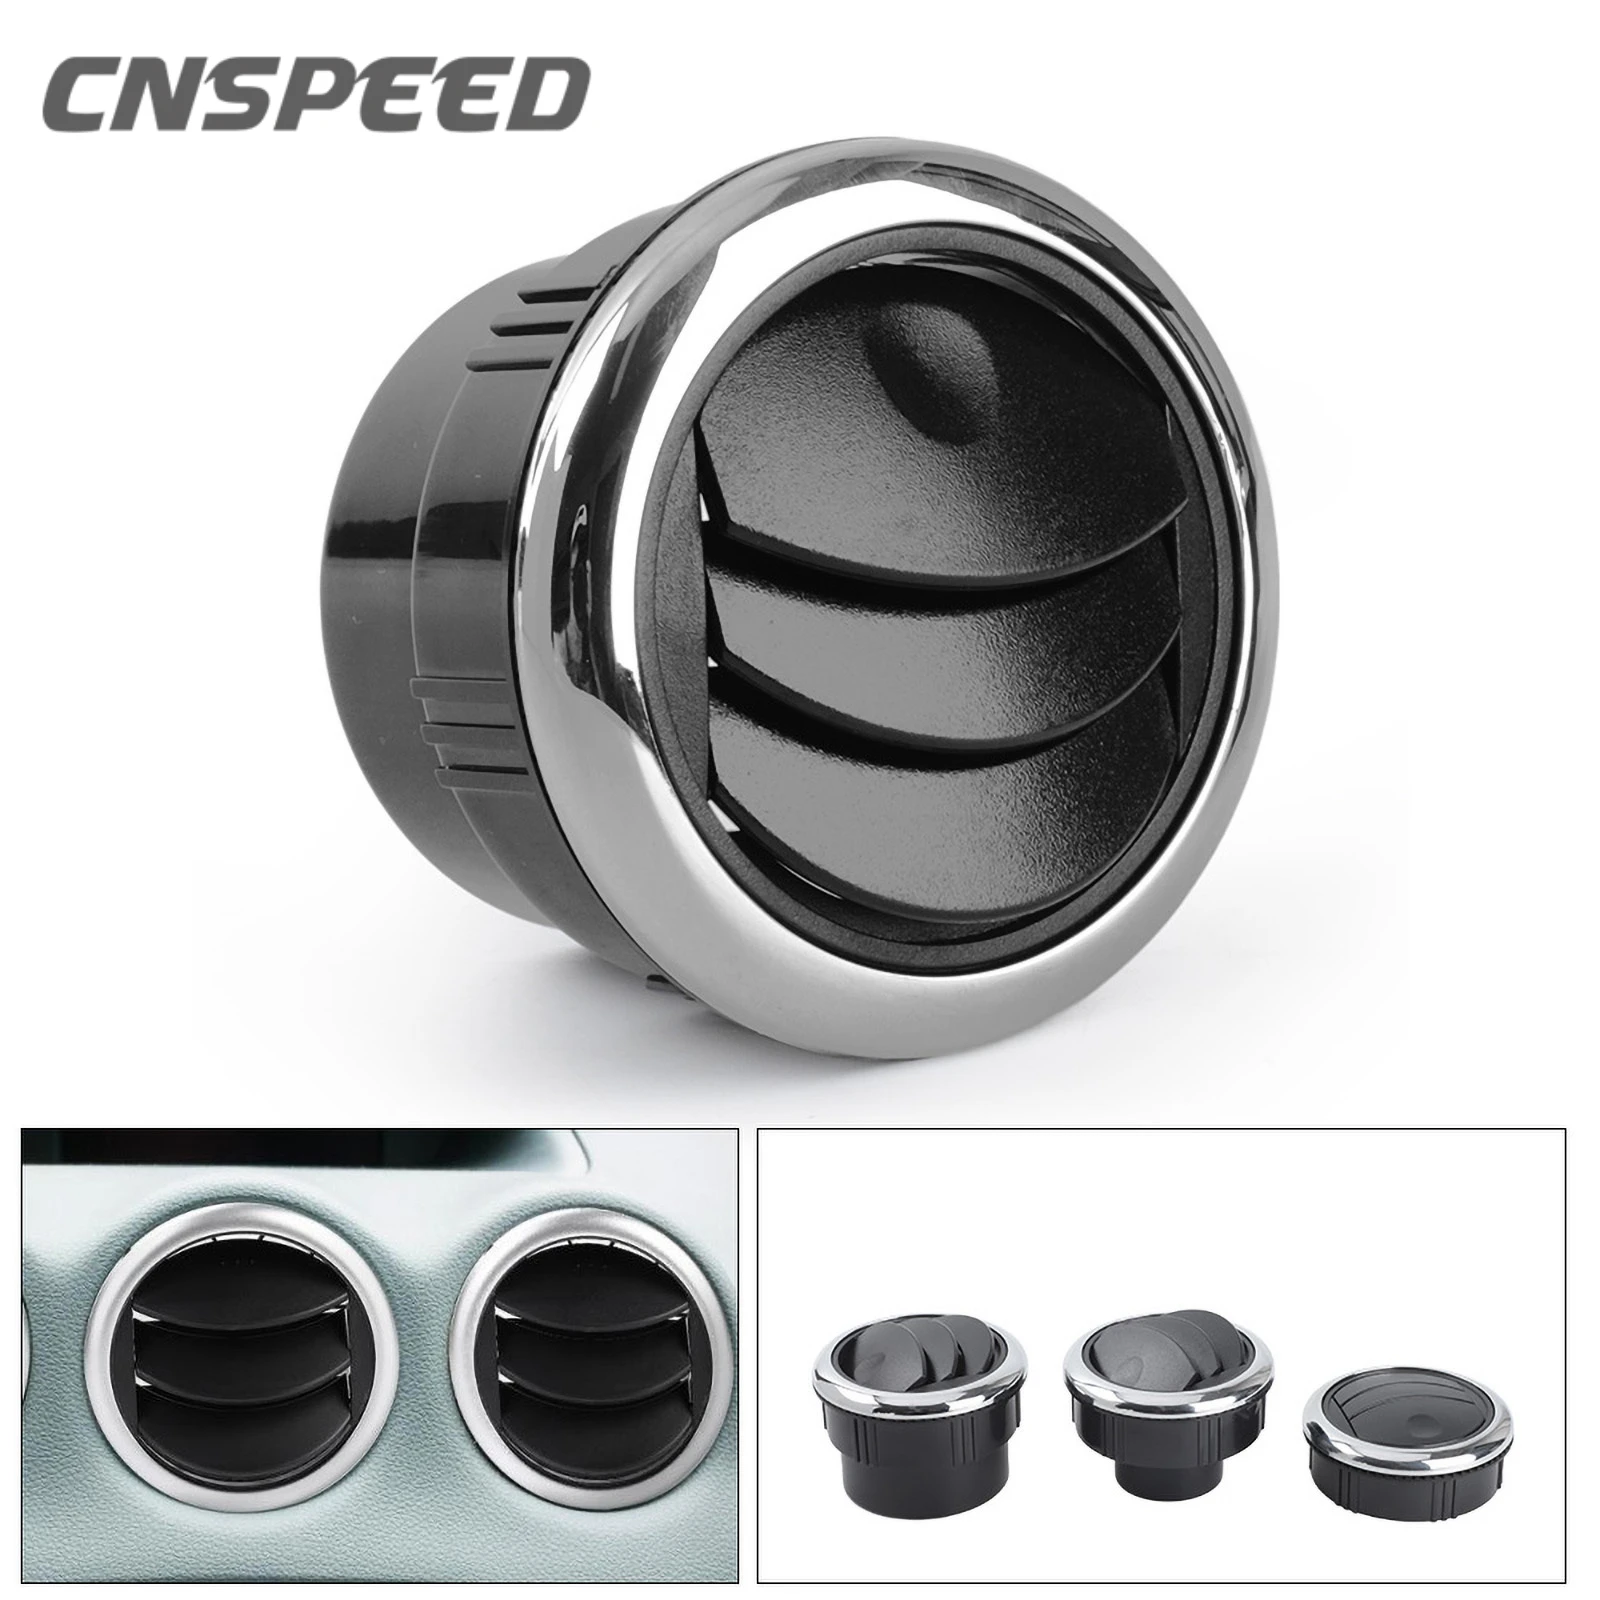 CNSPEED 80mm Universal Car Vent Dashboard Air Conditioning Vent Deflector Knob Type Rotation Air Outlet Vent for Camper Caravan